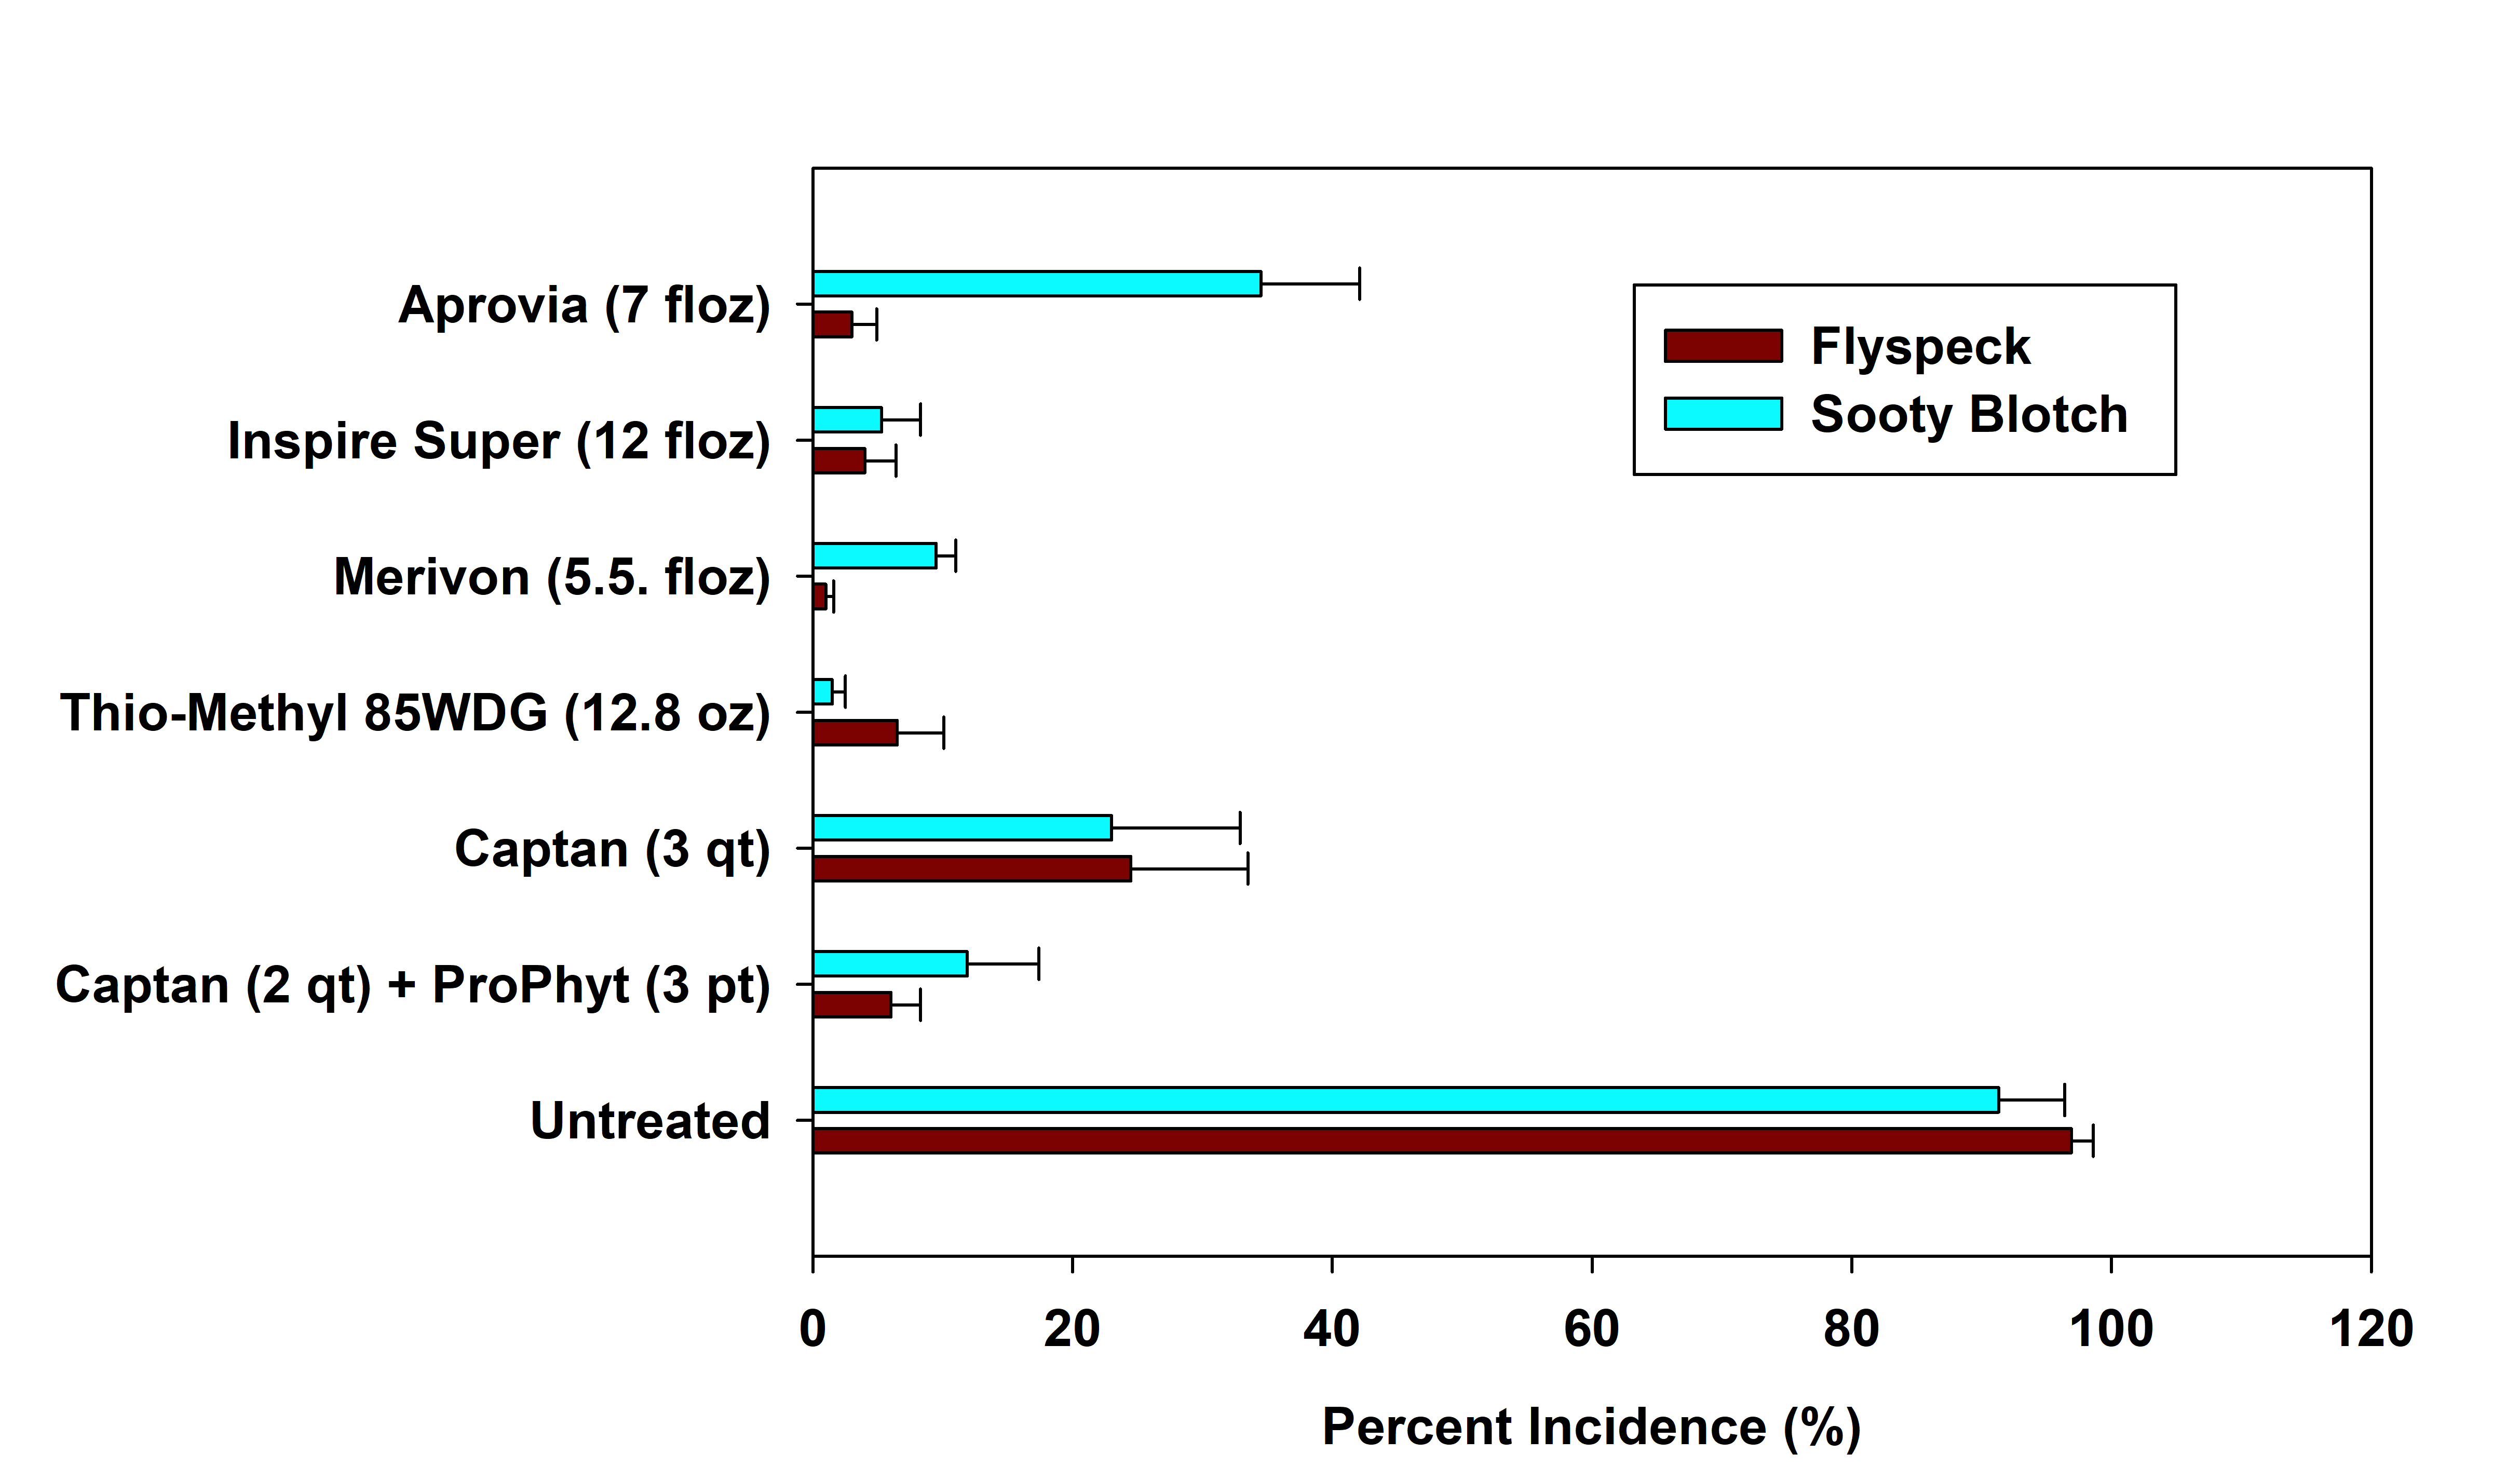 Fungicide Efficacy Results for FSSB Incidence